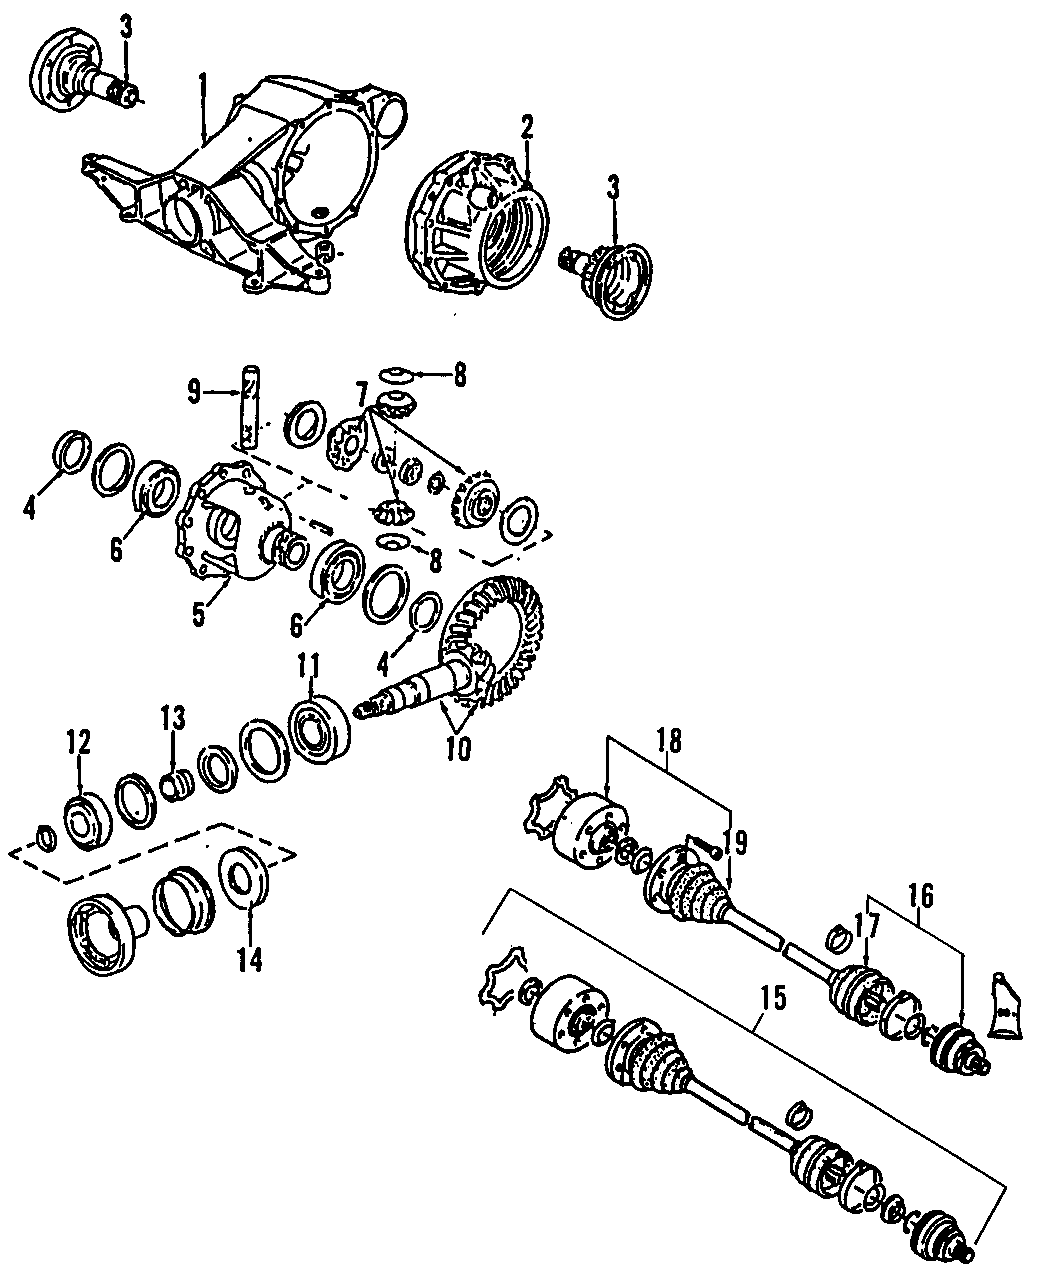 14DRIVE AXLES. REAR AXLE. AXLE SHAFTS & JOINTS. DIFFERENTIAL. PROPELLER SHAFT.https://images.simplepart.com/images/parts/motor/fullsize/F257120.png